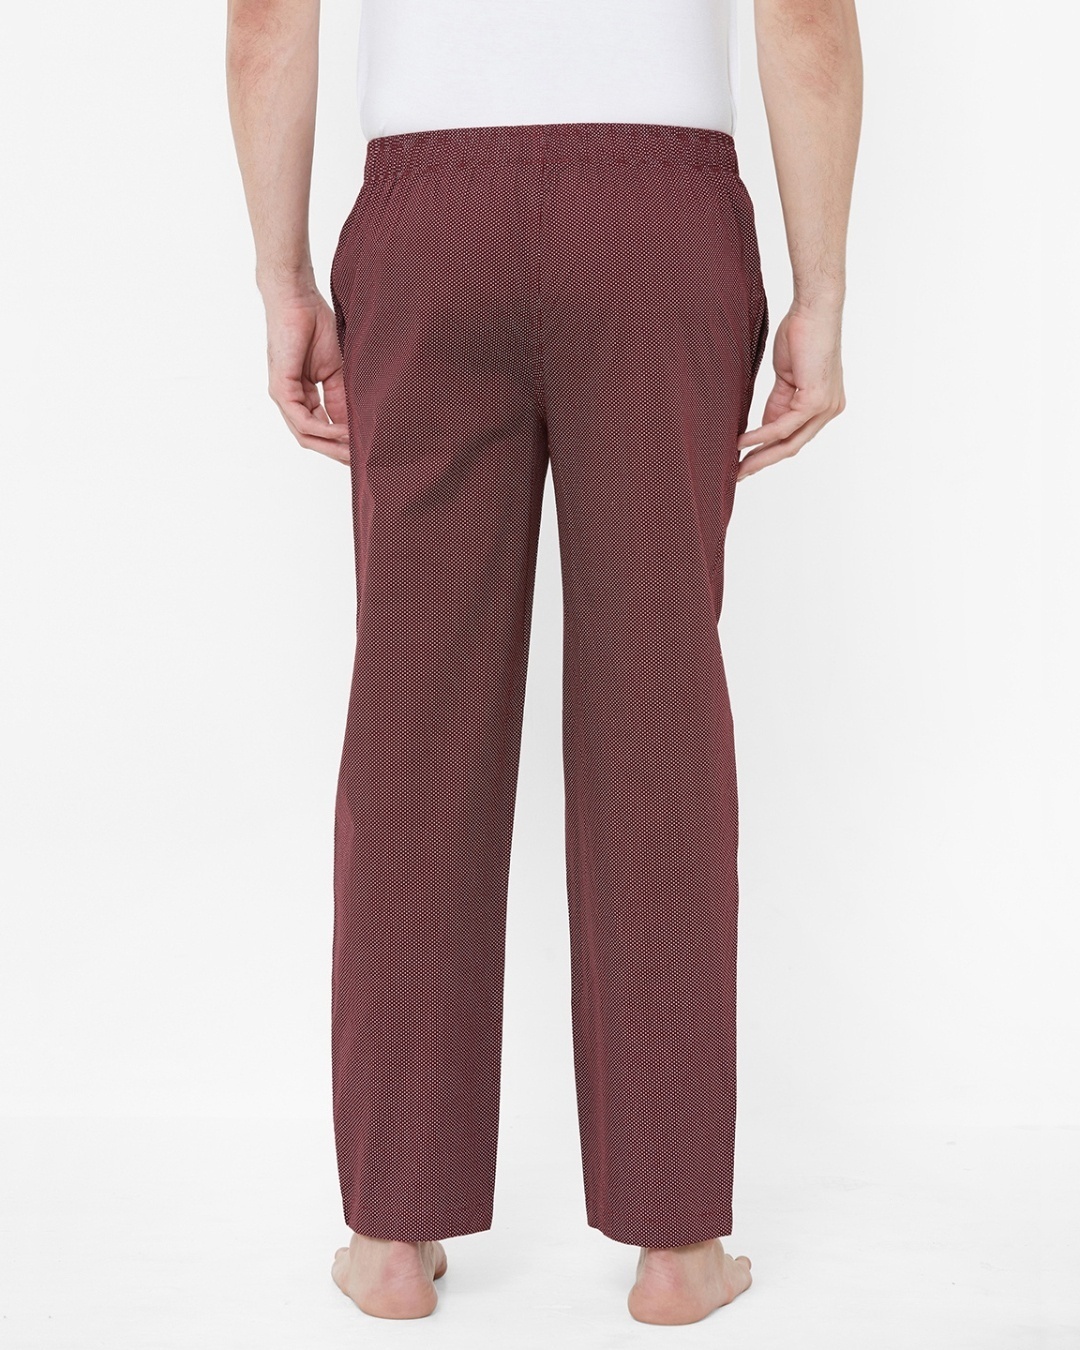 Shop Men's Maroon All Over Printed Cotton Lounge Pants-Design